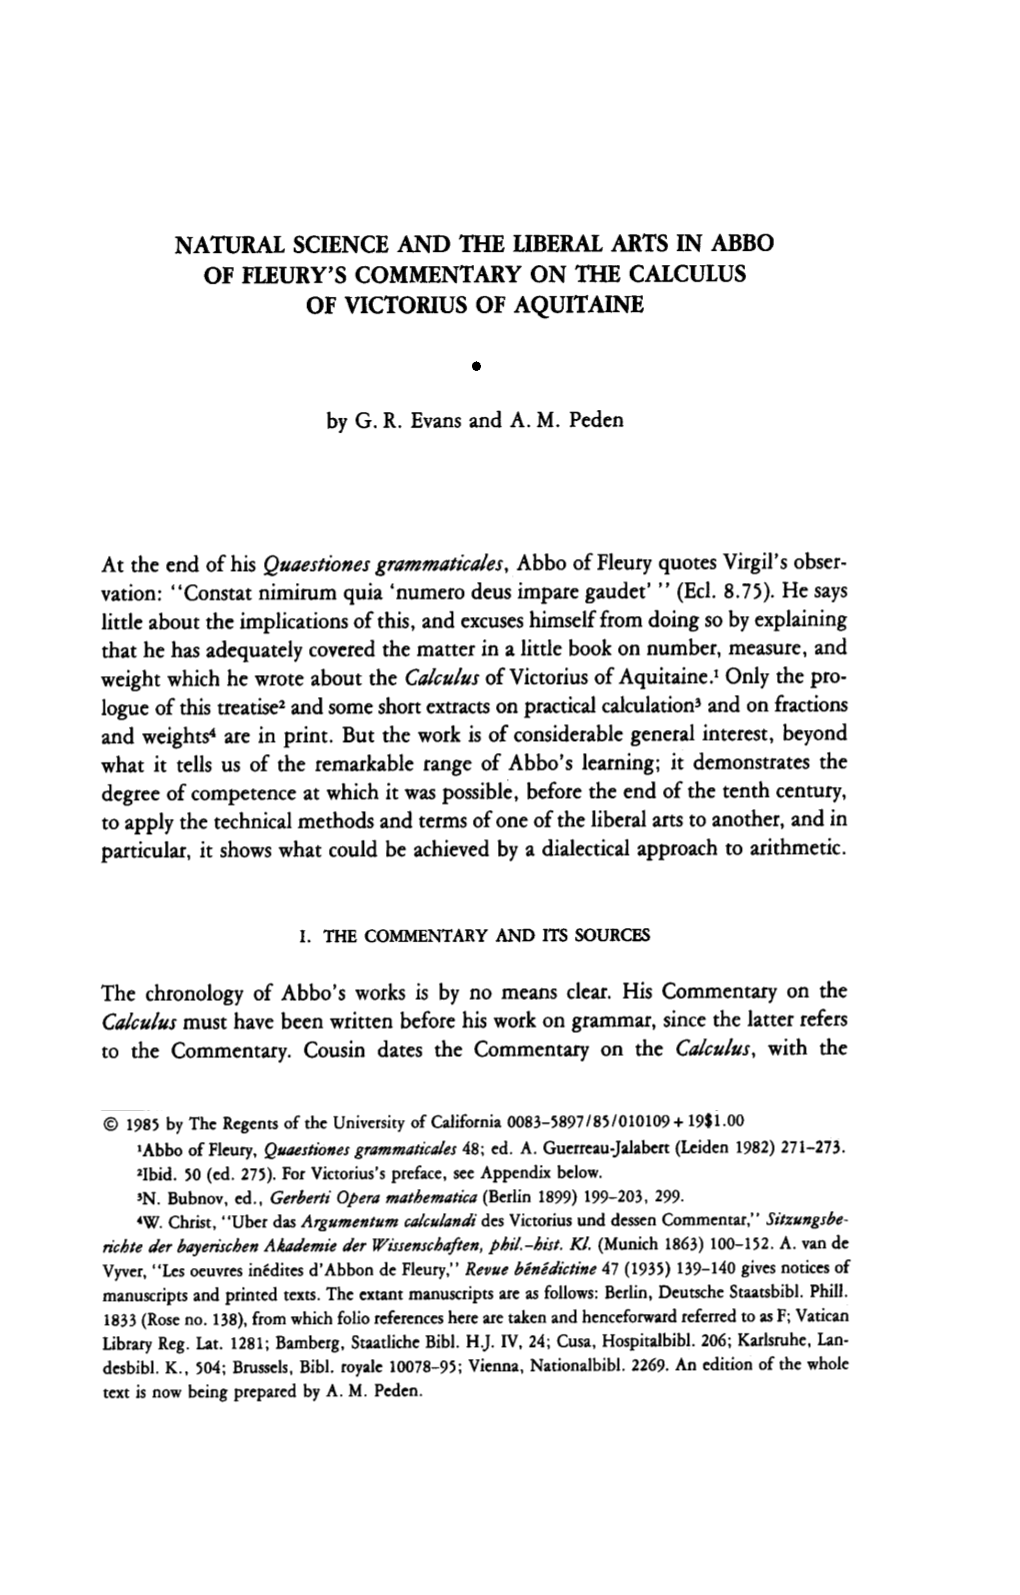 Natural Science and the Liberal Arts in Abbo of Fleury's Commentary on the Calculus of Victorius of Aquitaine